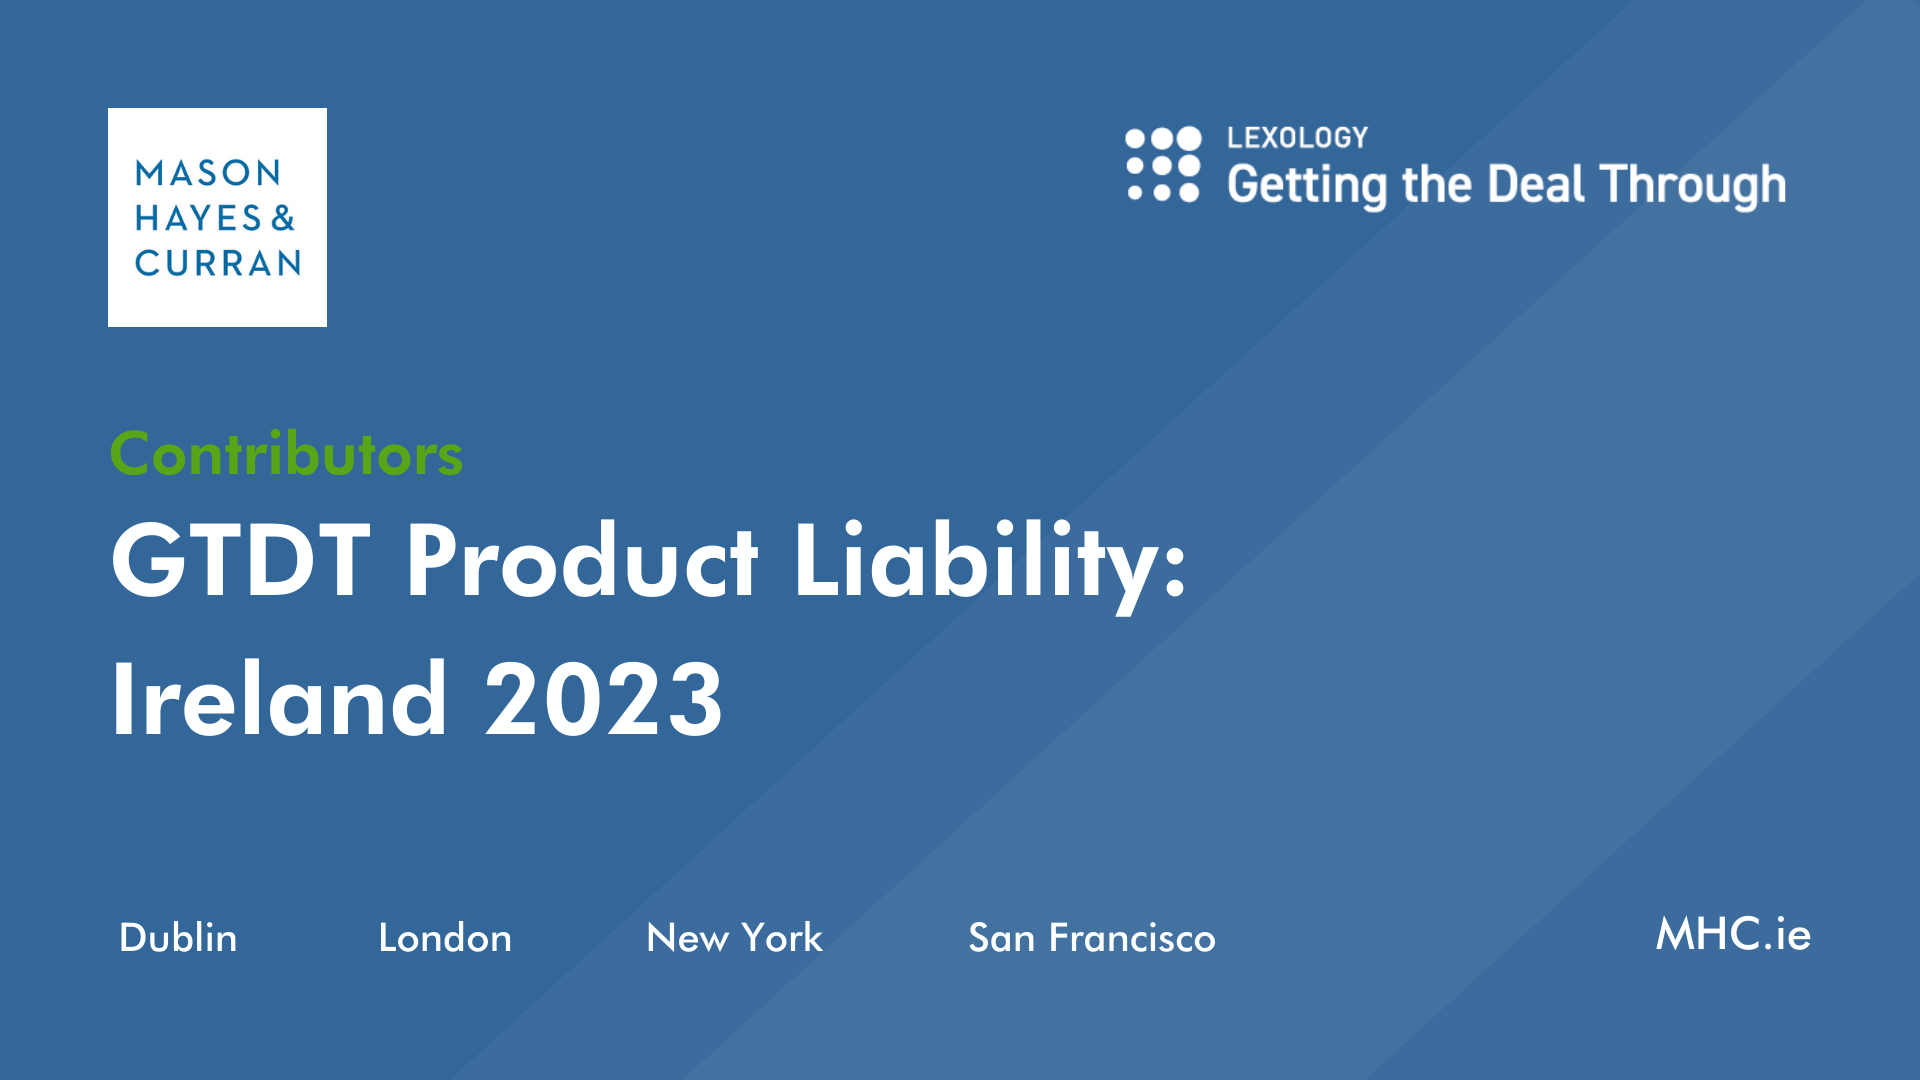 GTDT Product Liability Ireland 2023